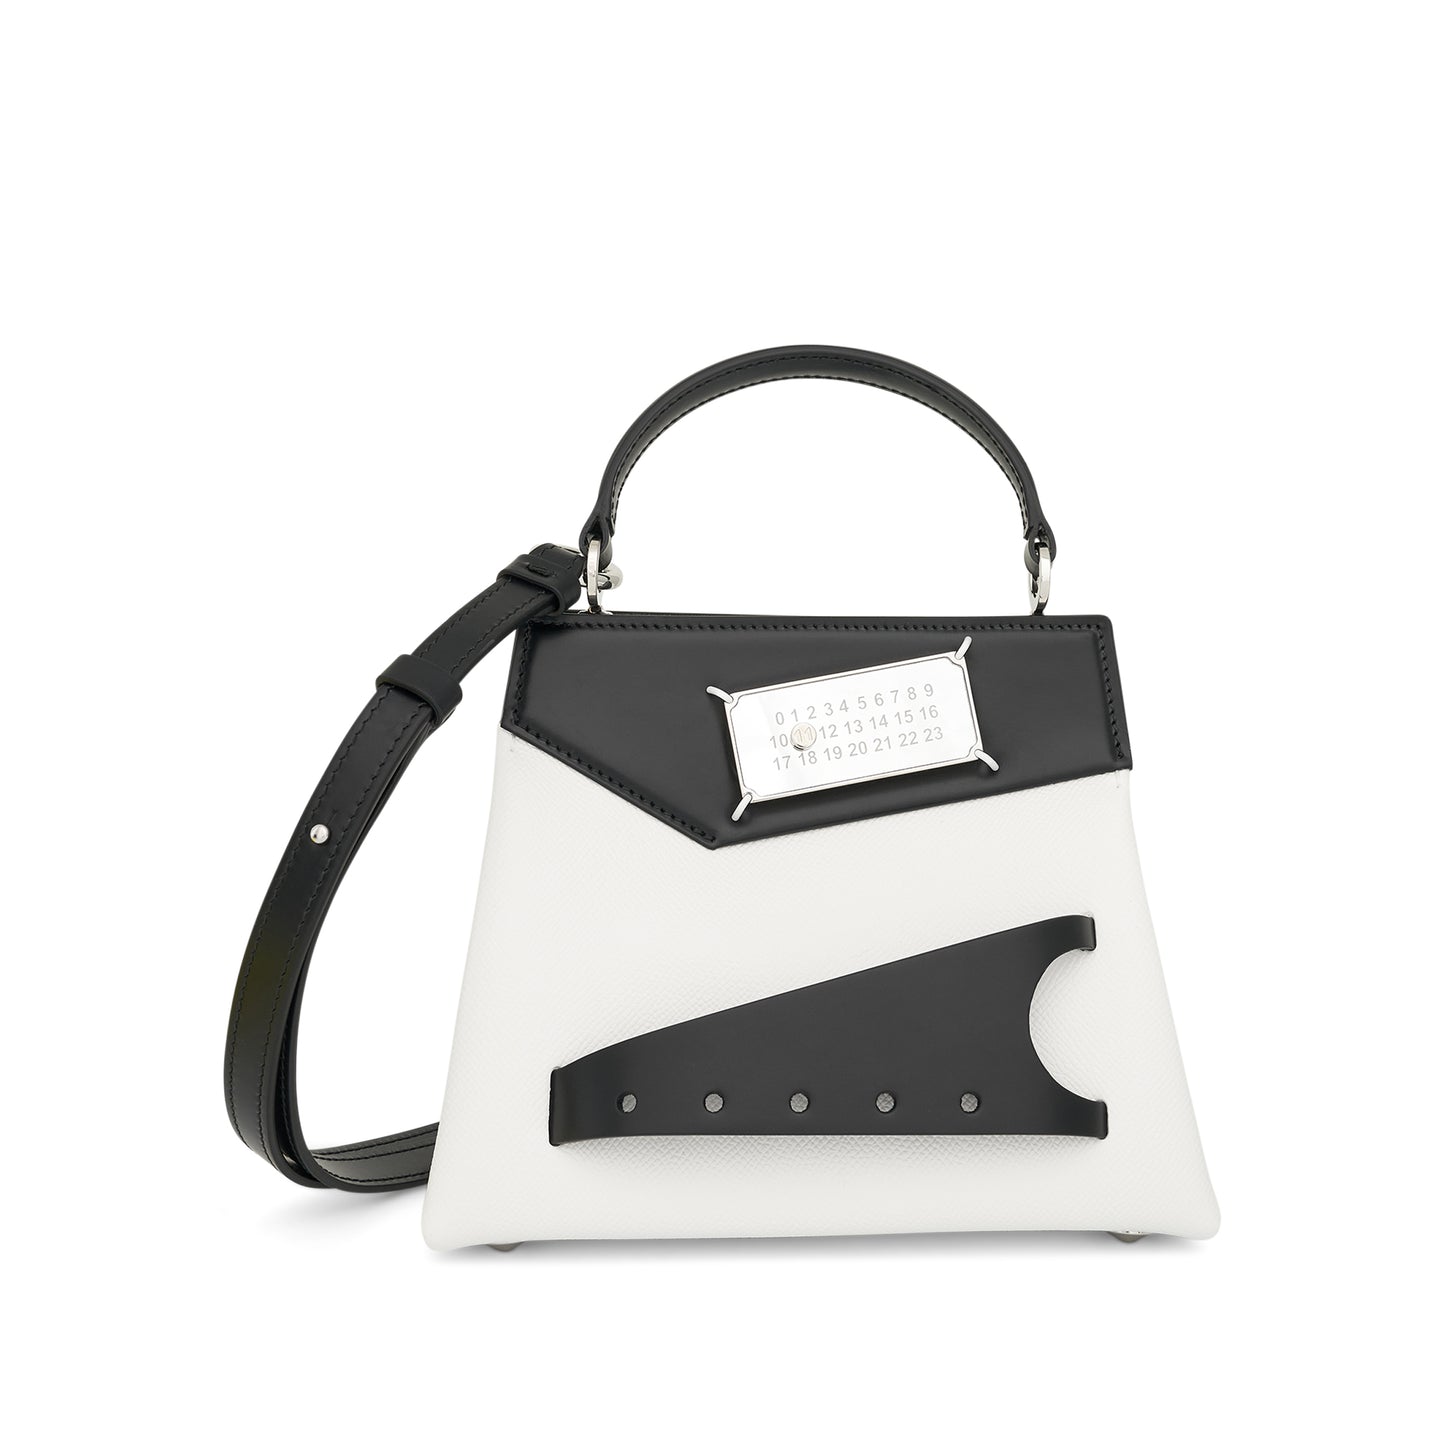 Small Snatched Handbag in Black/White